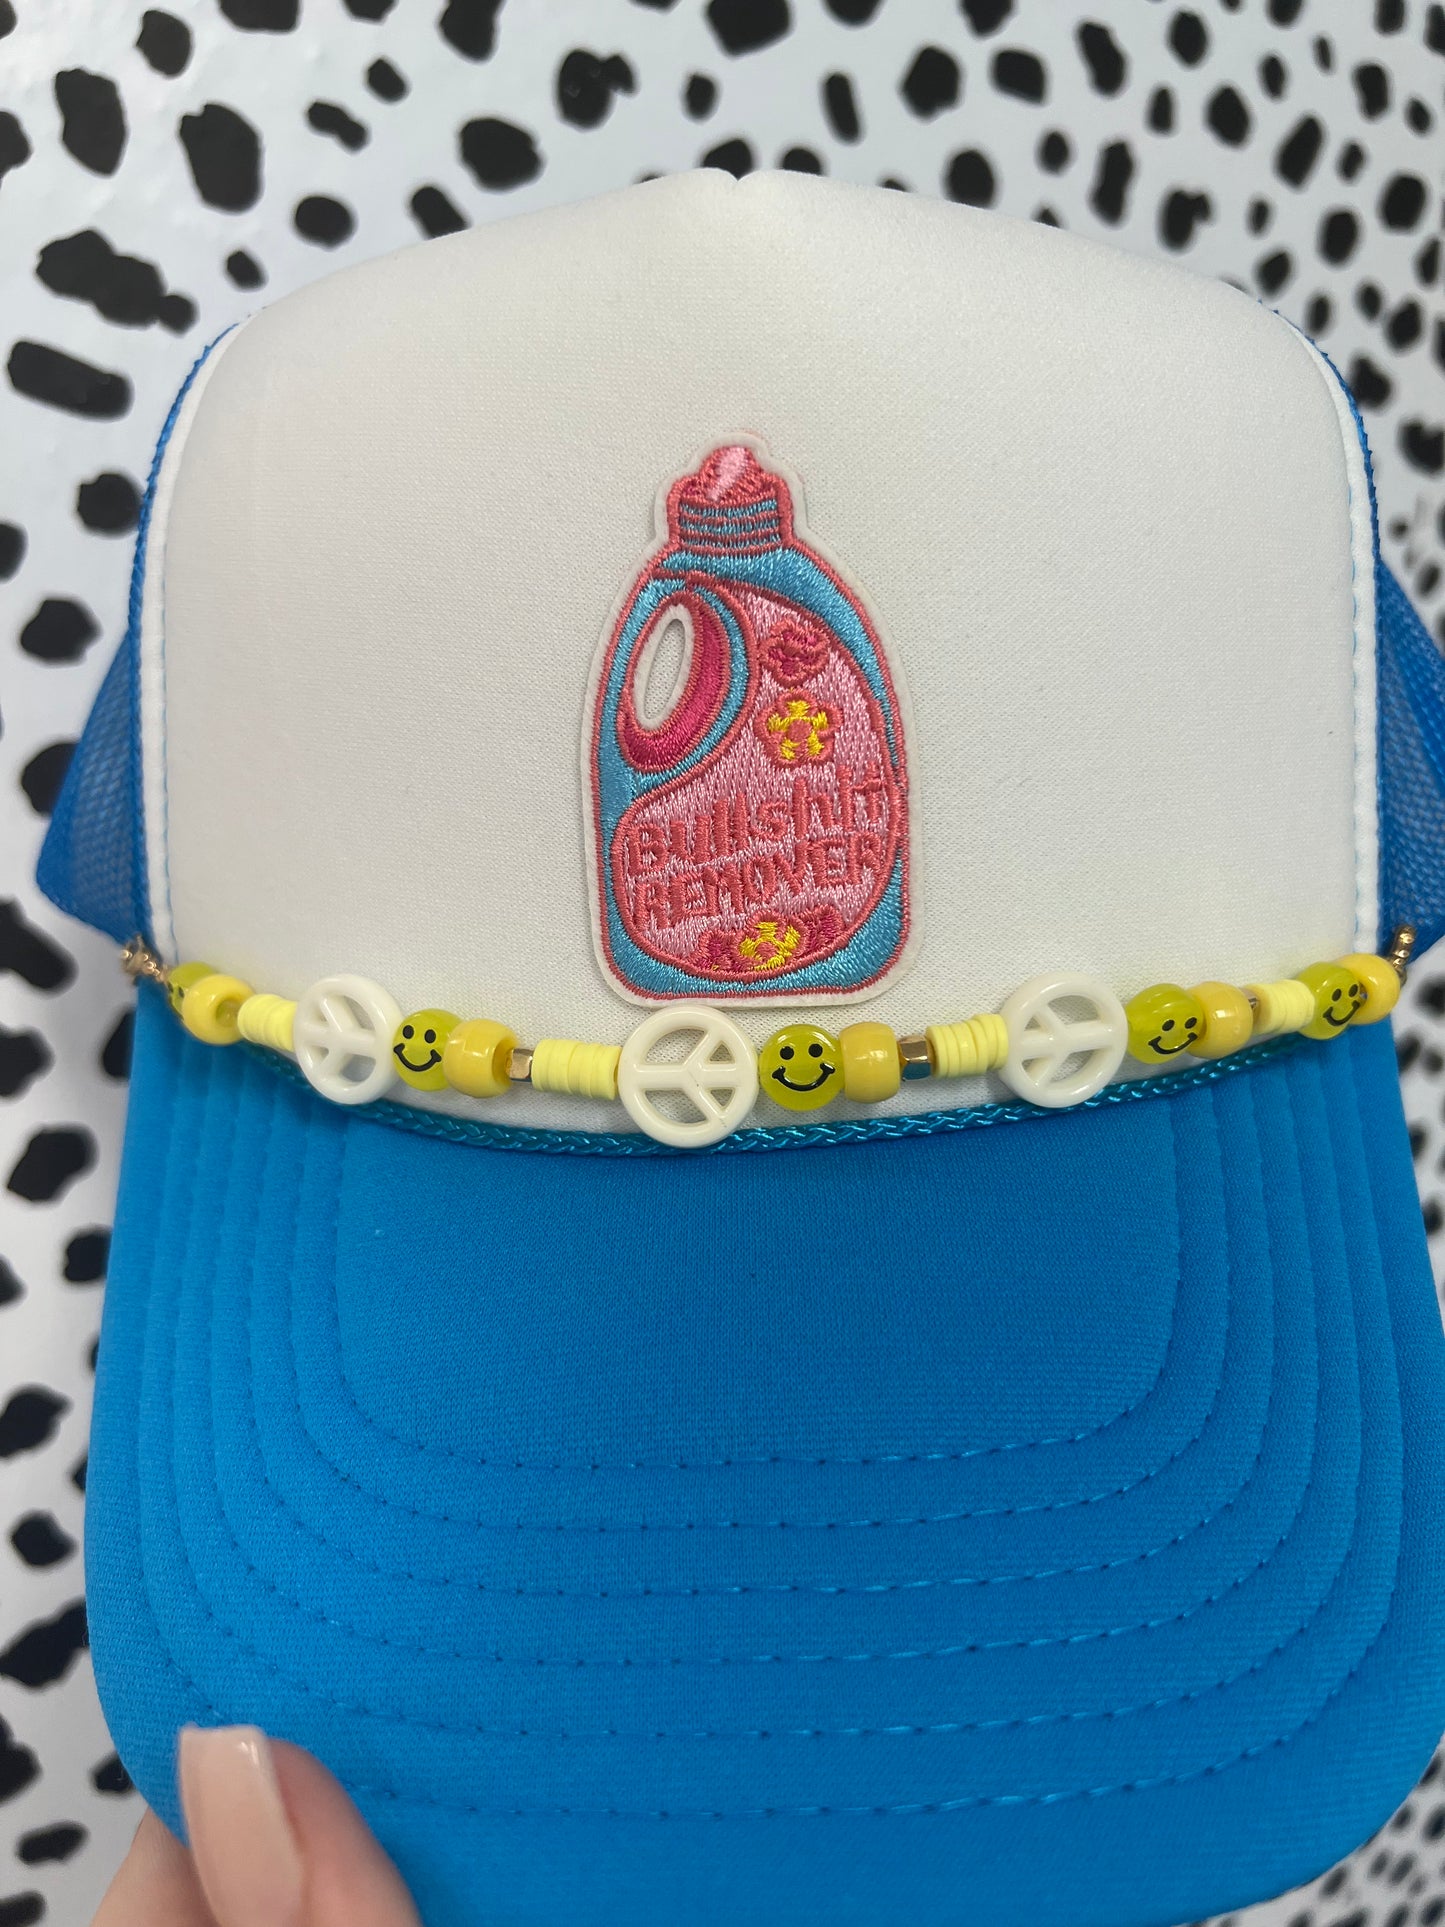 BS remover trucker hat with hat charm